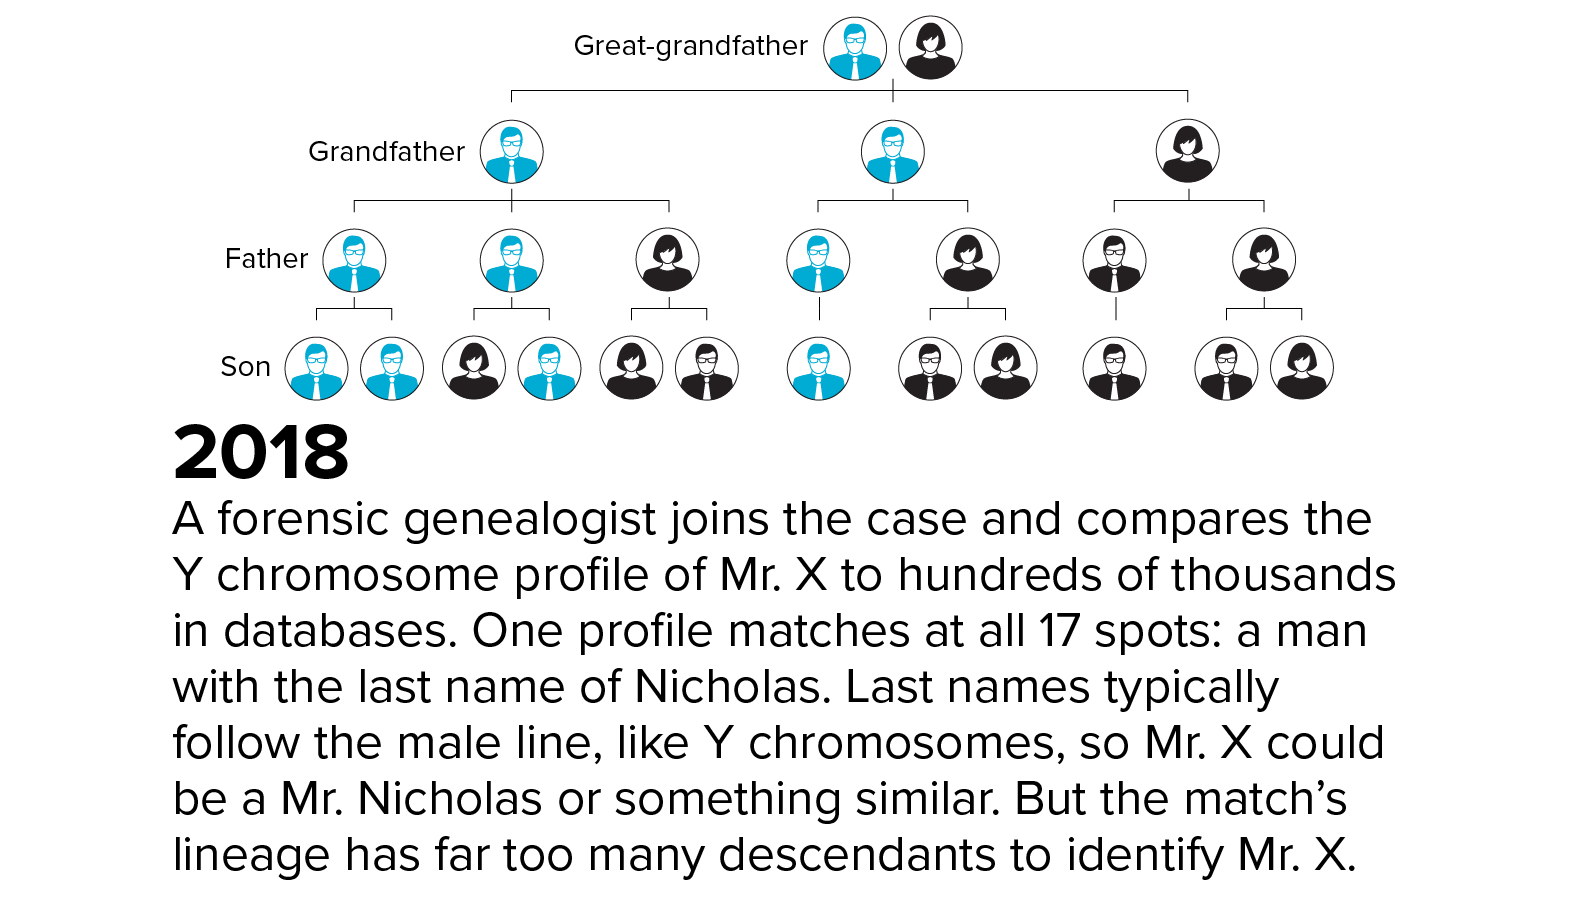 2018: A forensic genealogist joins the case and compares the Y chromosome profile of Mr. X to hundreds of thousands in databases. One profile matches at all 17 spots: a man with the last name of Nicholas. Last names typically follow the male line, like Y chromosomes, so Mr. X could be a Mr. Nicholas or something similar. But the match’s lineage has far too many descendants to identify Mr. X.